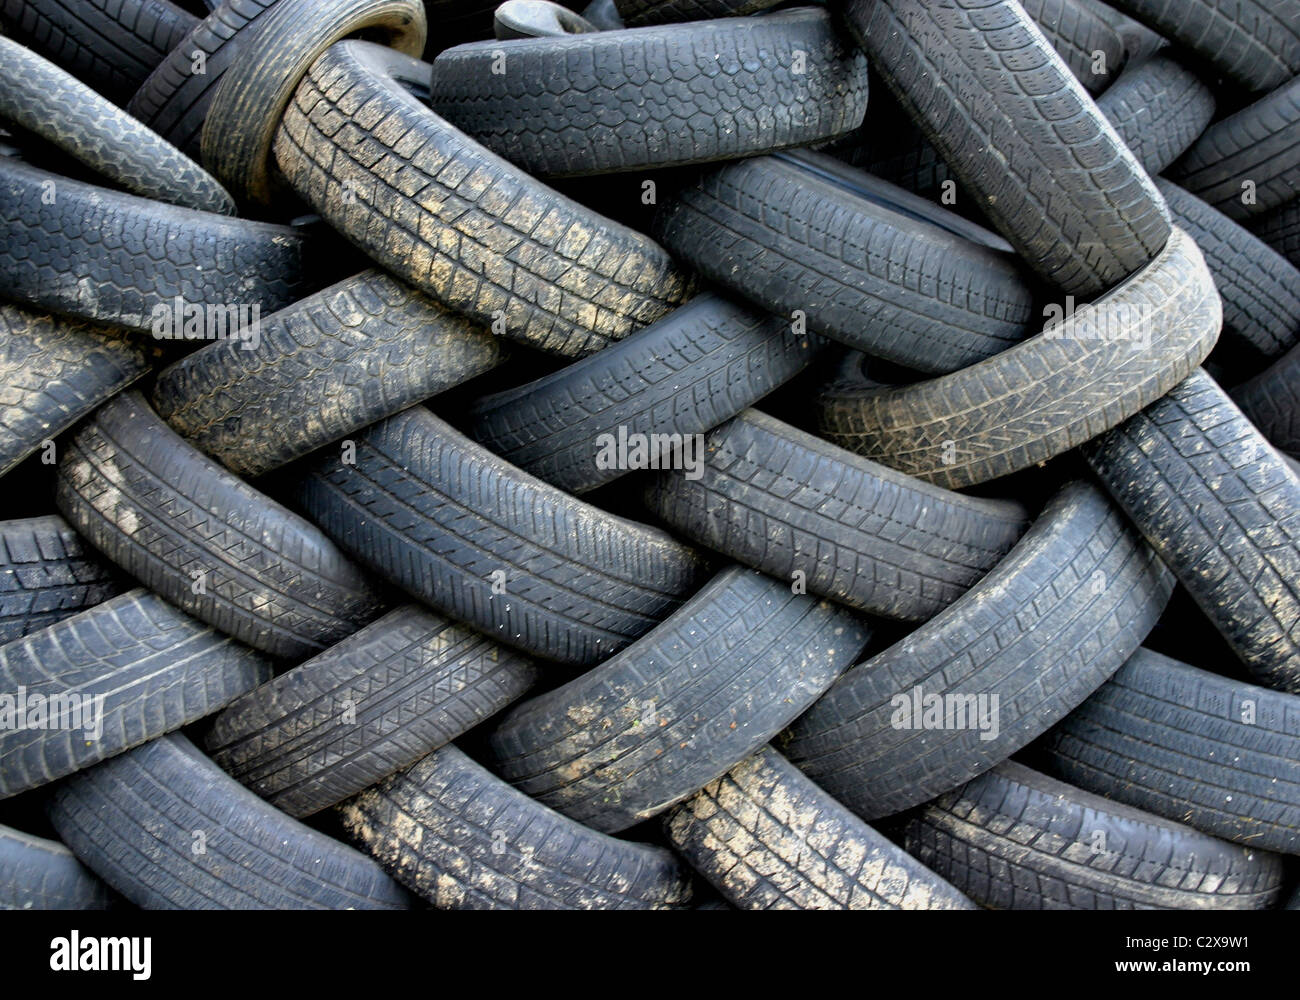 Used tire depot Stock Photo